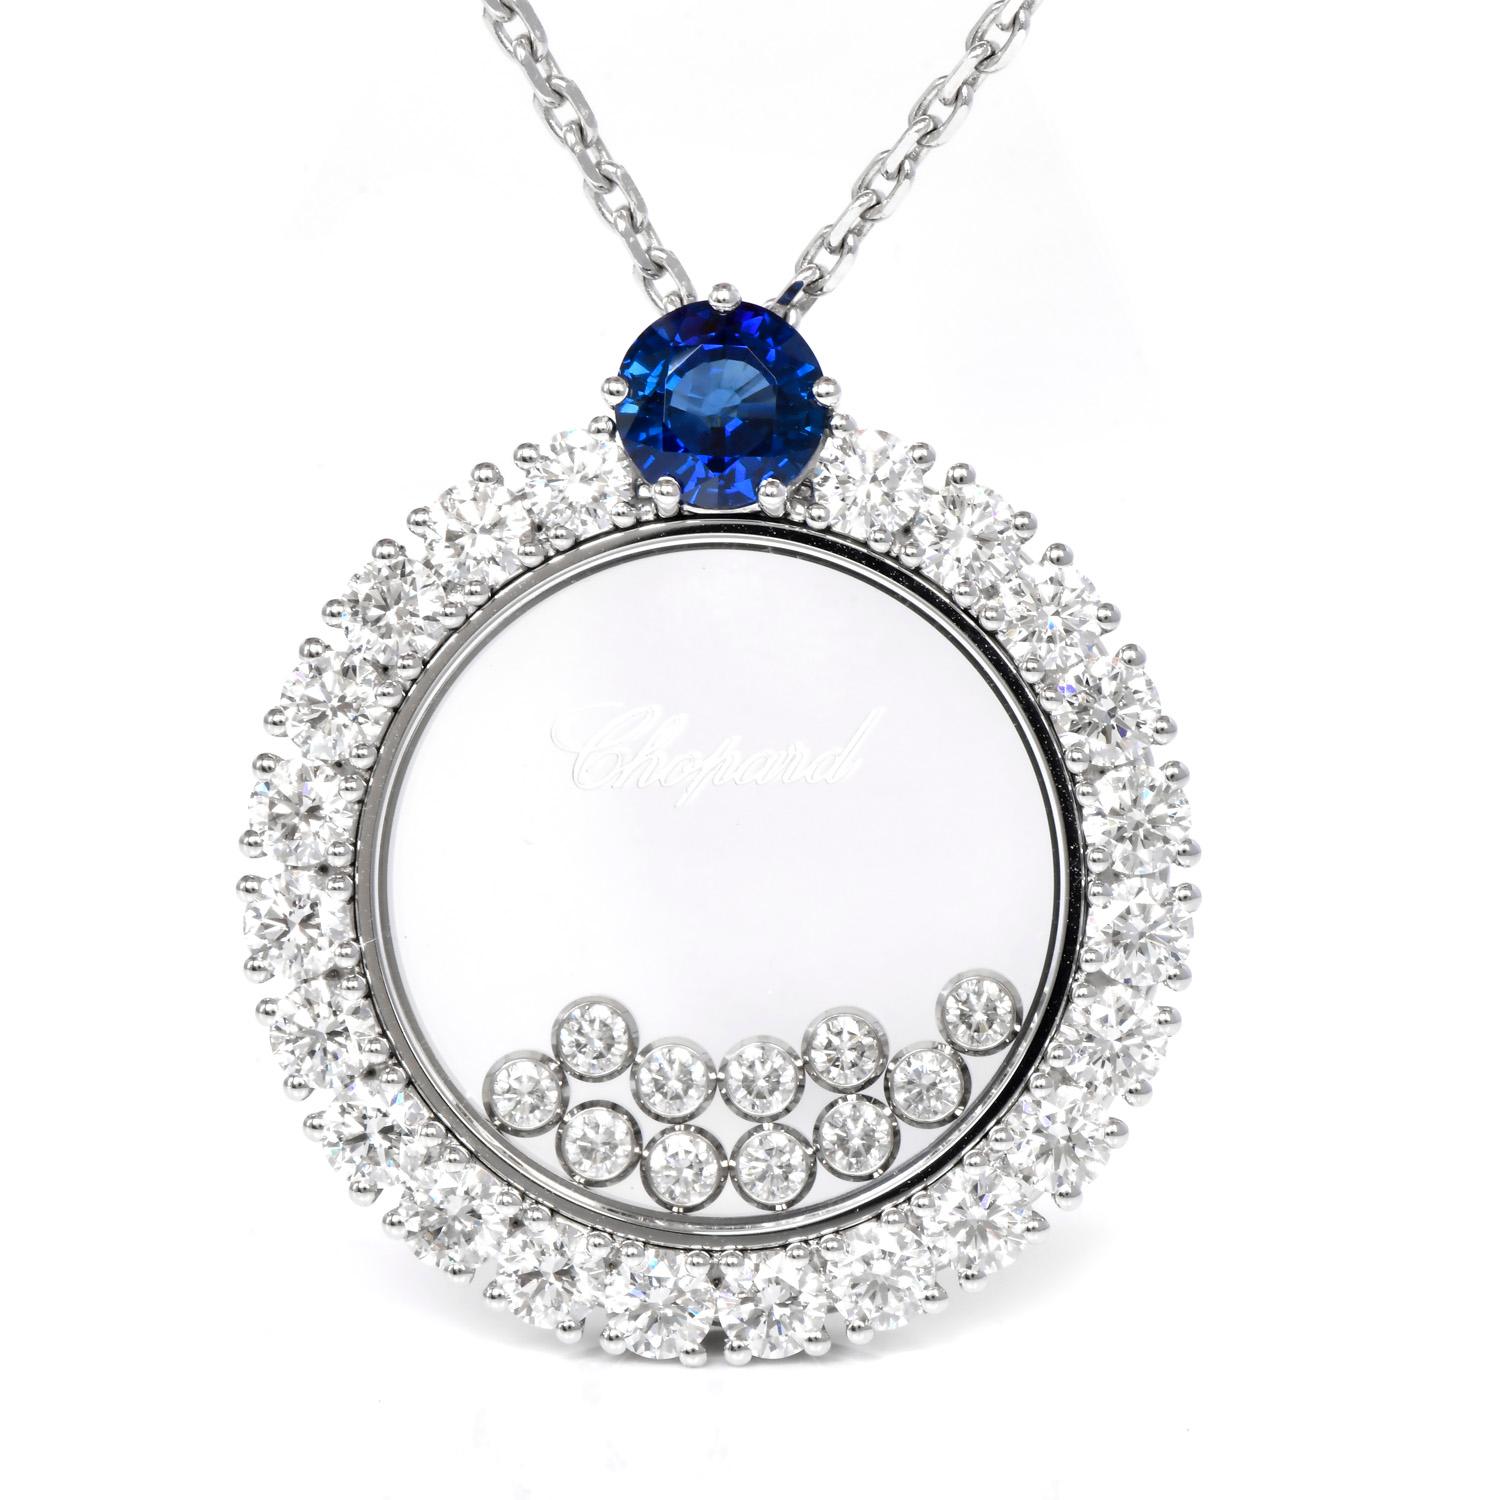 This Exquisite Chopard Happy Diamonds Necklace from the Icons collections is the perfect balance between Luxury and Everyday wear,

The floating diamond necklace is finely crafted from luxurious 18K white gold.

This necklace features one stunning